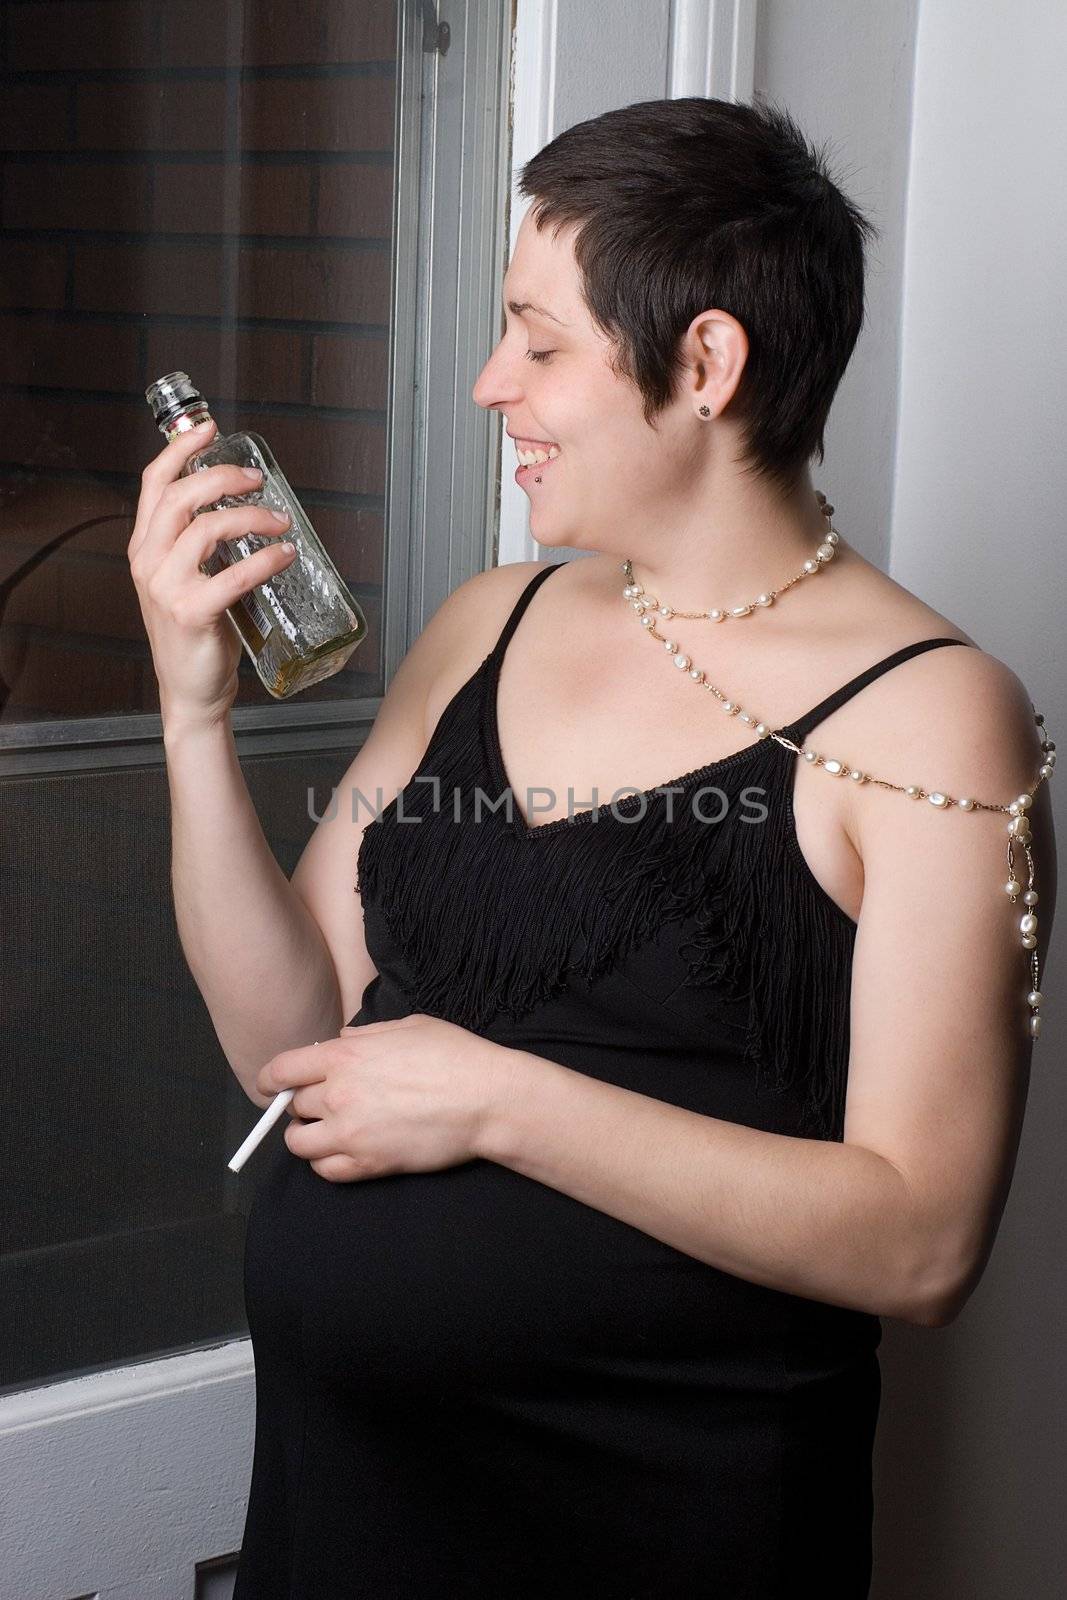 Late twentie pregnant woman in old fashion evening dress with a bottle of alchool in one hand and a unlite cigarette in the other